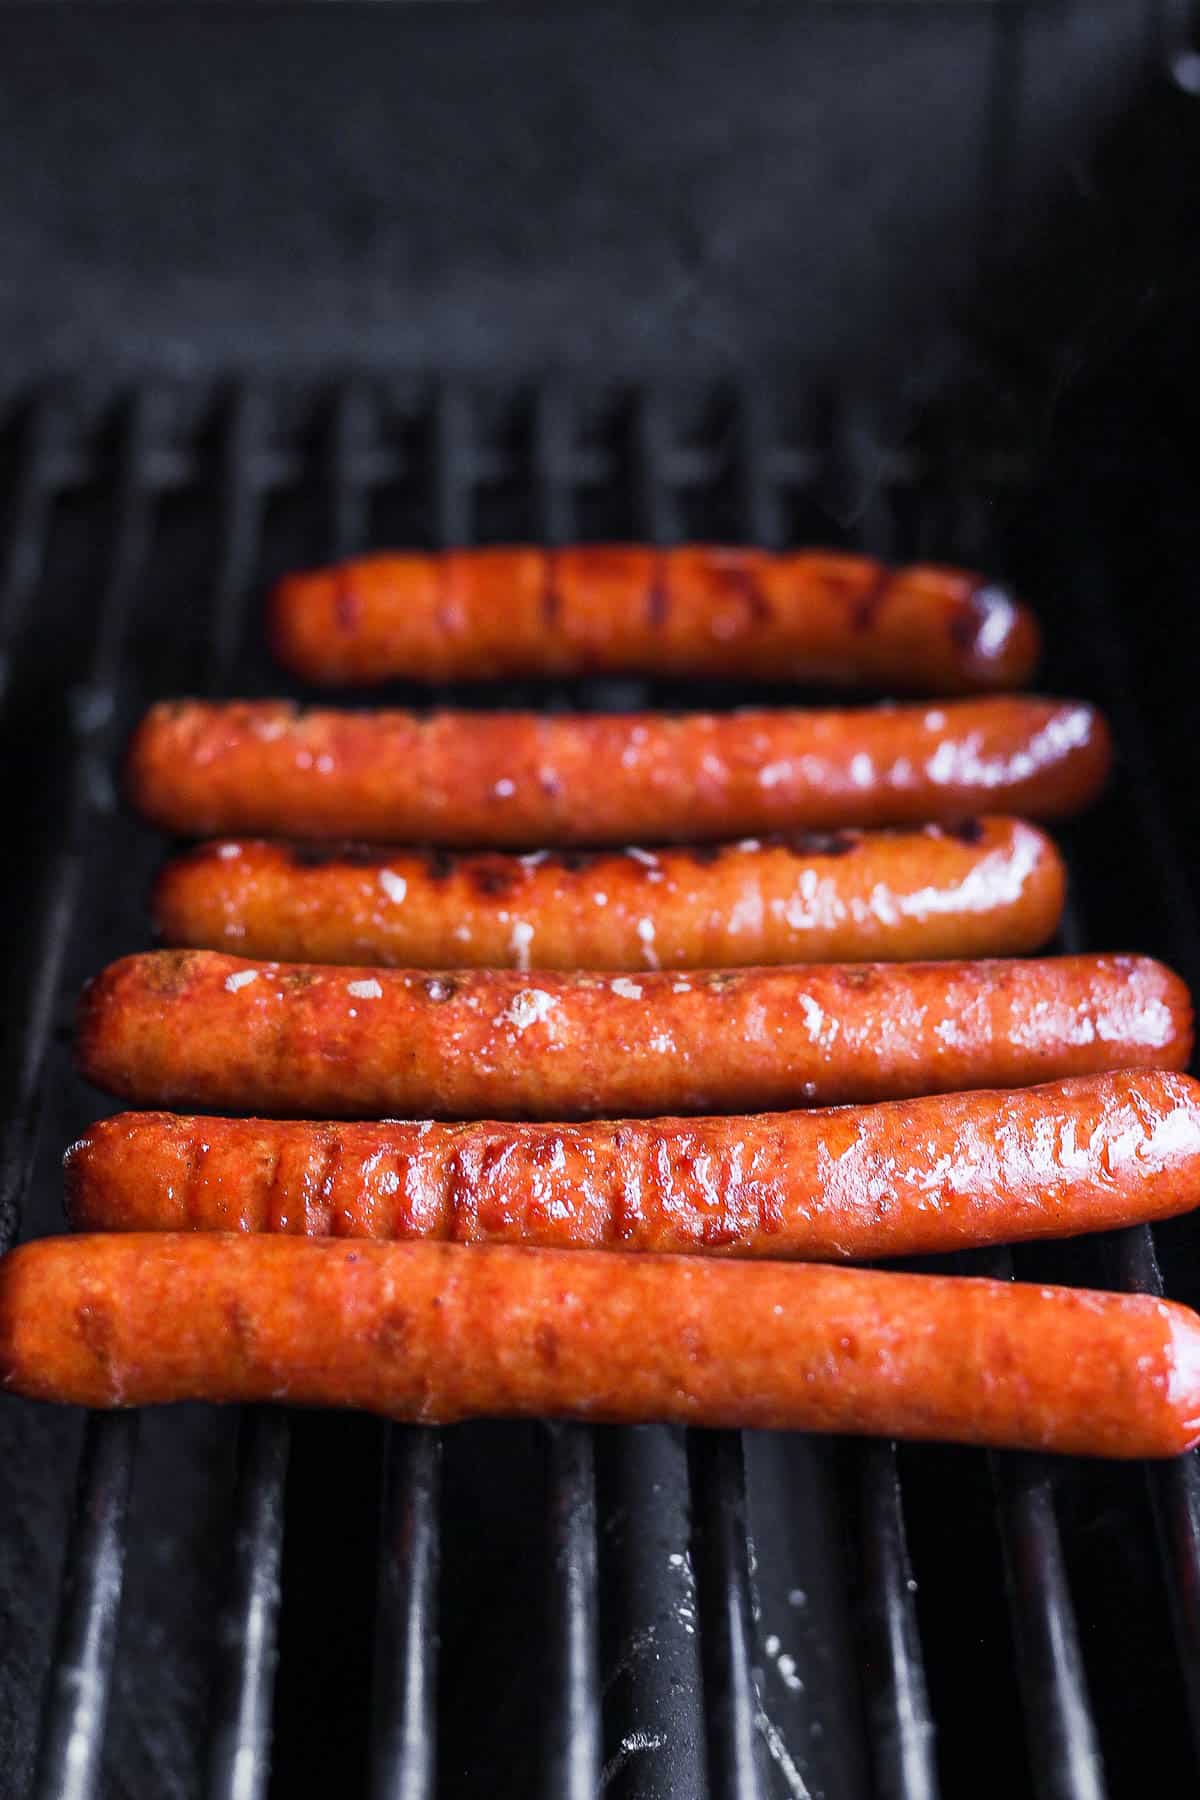 Hot dogs on the grill.